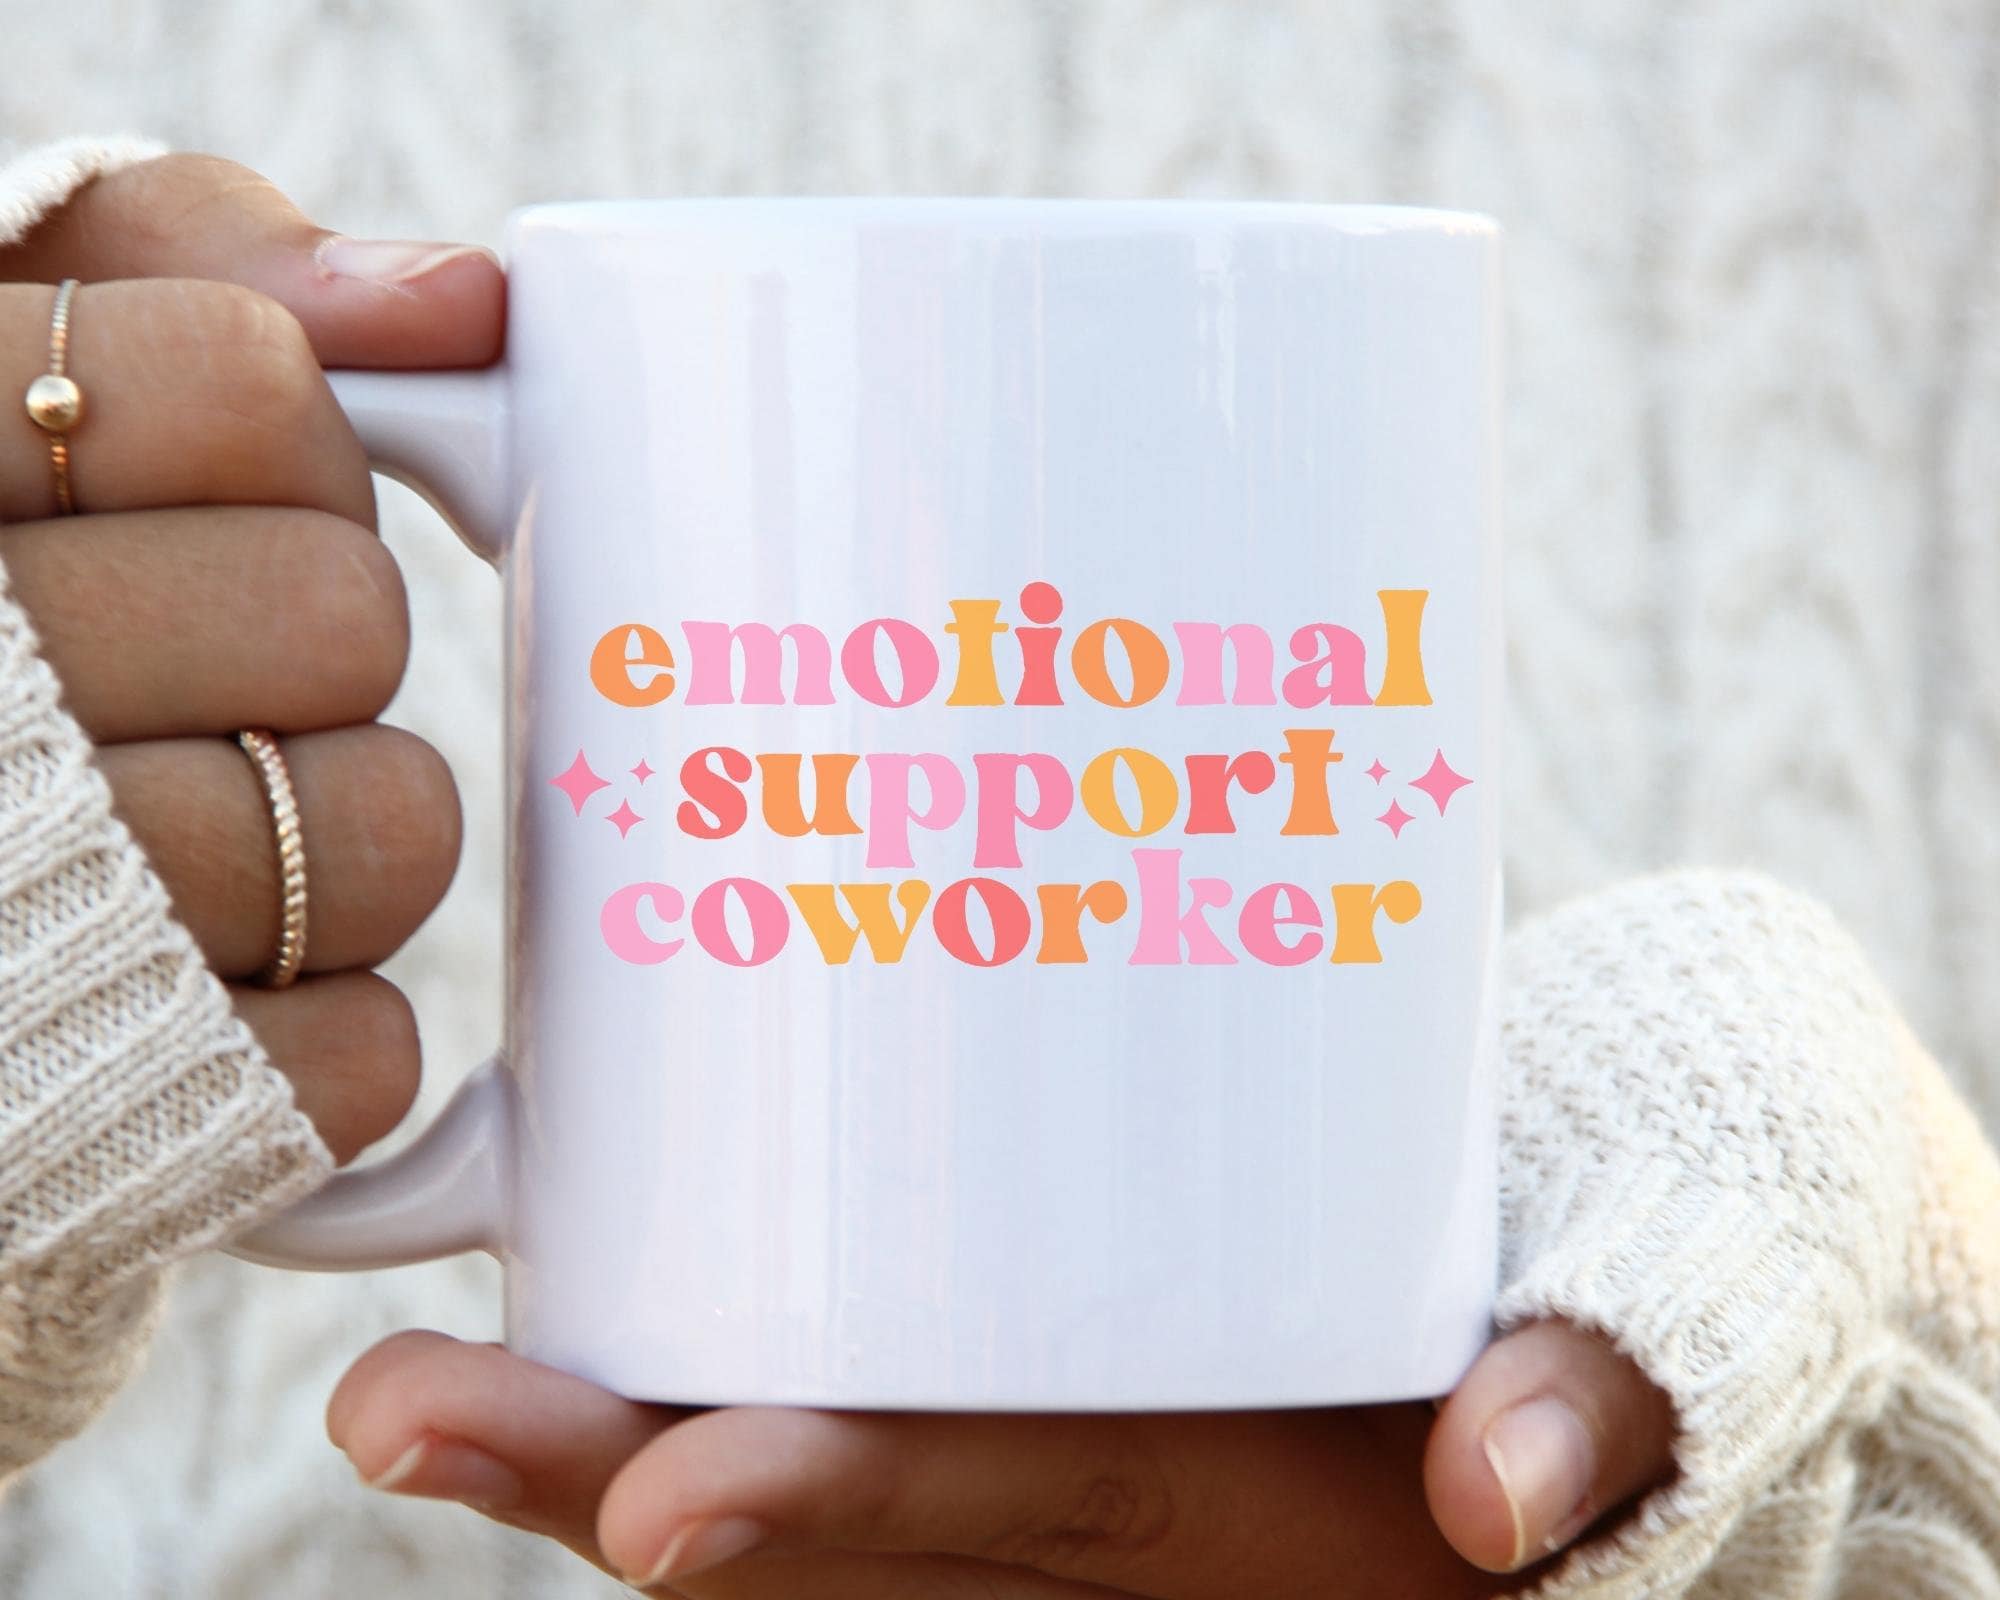 Zebra Coffee Mug, Zebra Lover Gifts, Office Gag Gift for Colleague Co- workers Friend, Fun Employee Appreciation Gifts Under 25 Dollars 